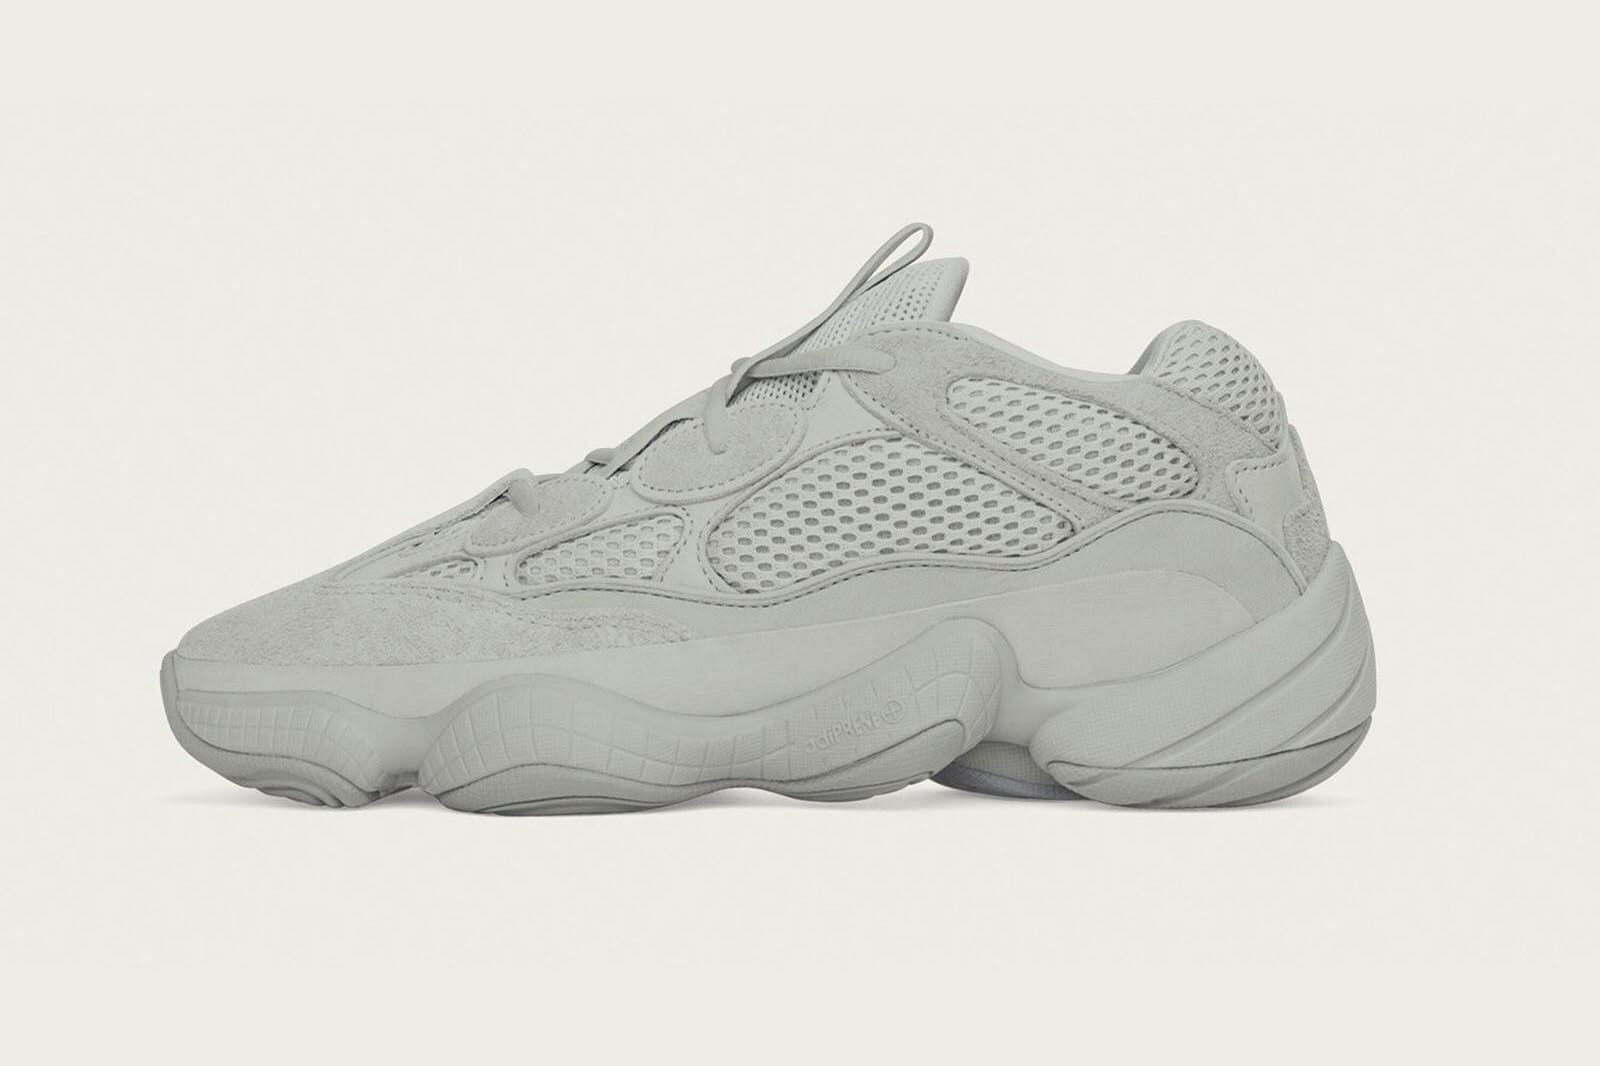 yeezy 500 first colorway